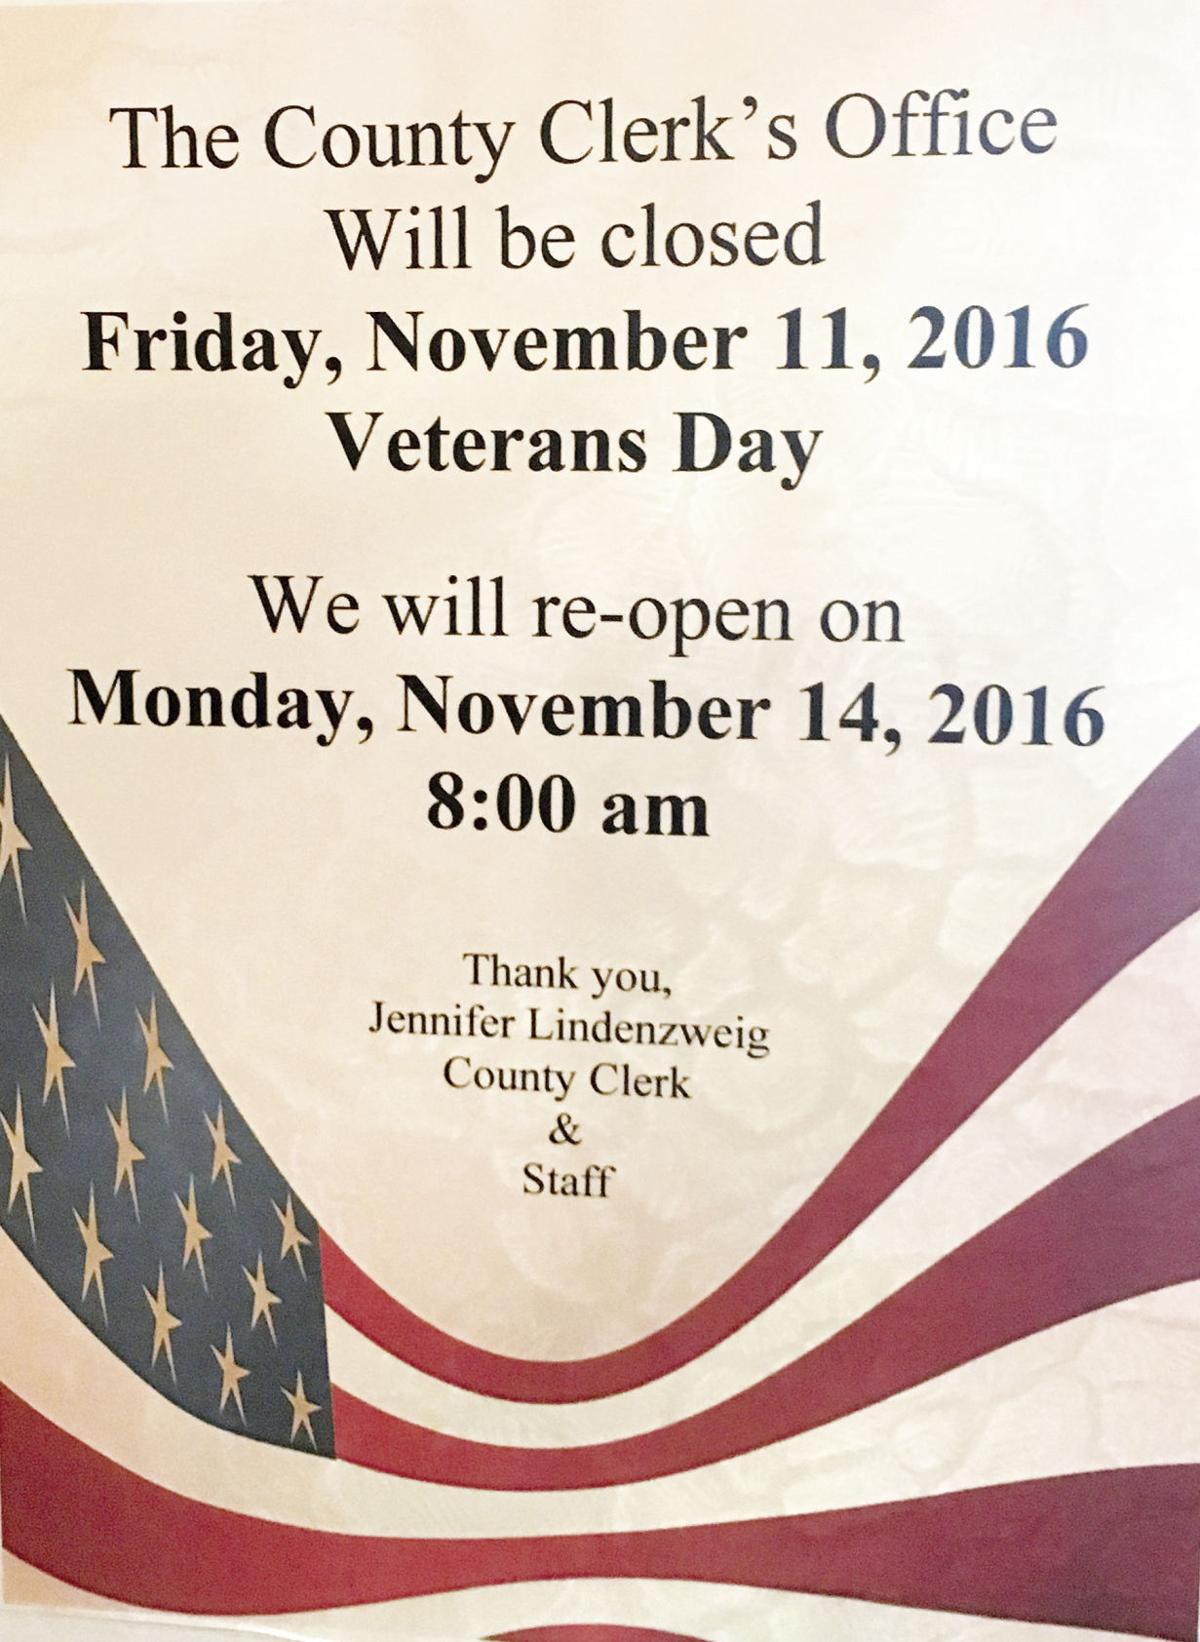 Veterans Day closings announced, activities scheduled News